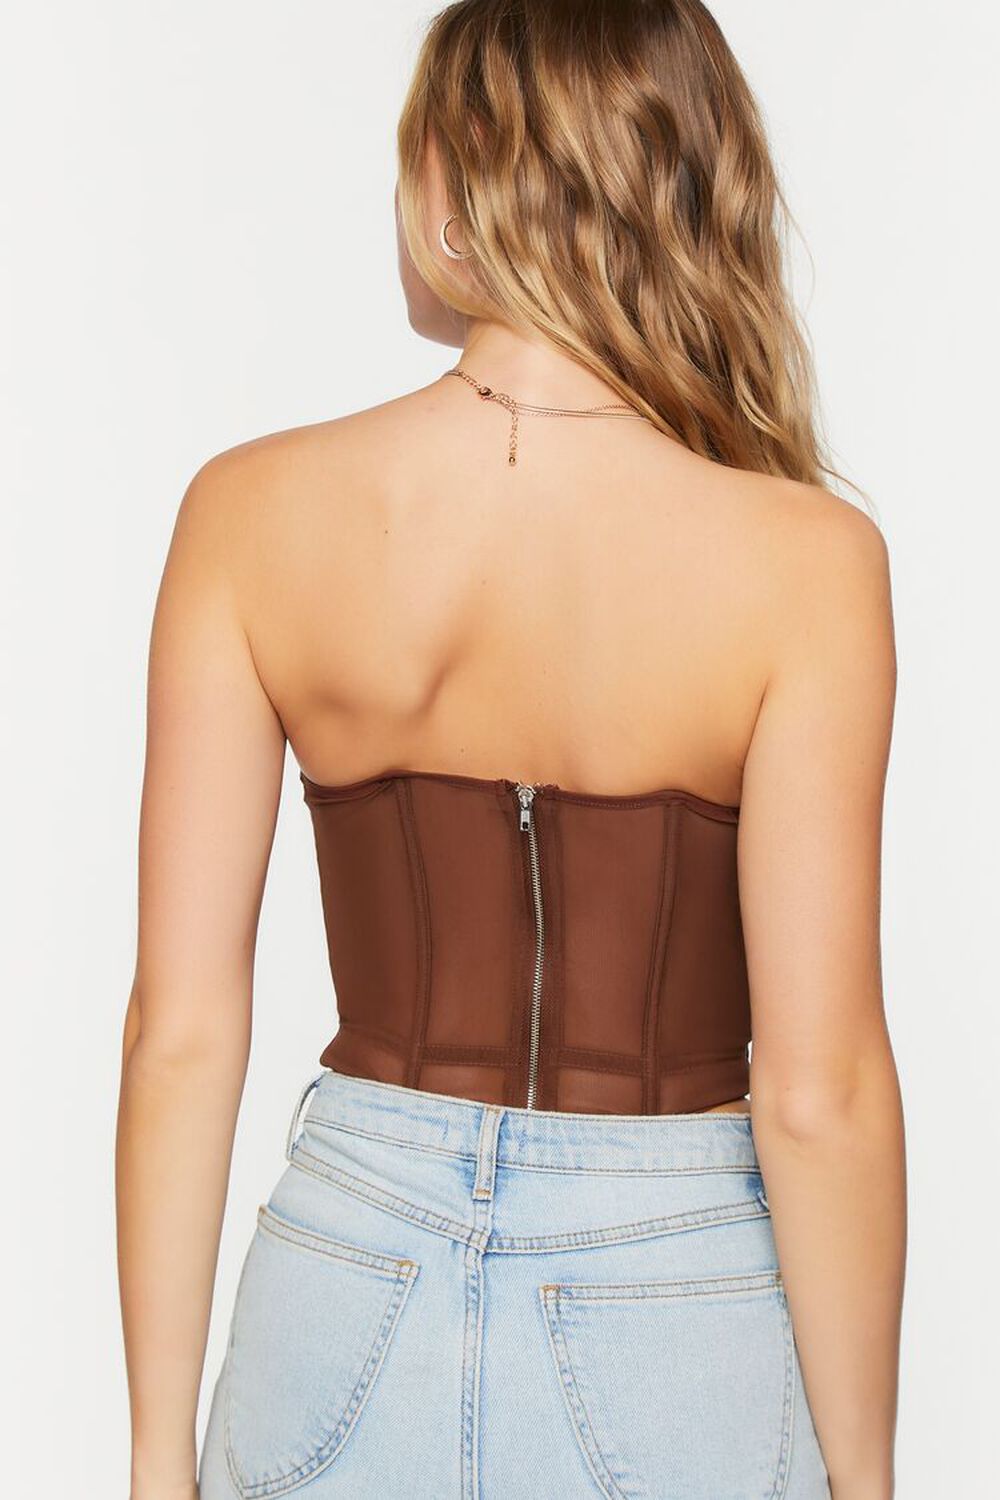 TURKISH COFFEE Mesh Quilted Bustier Tube Top, image 3